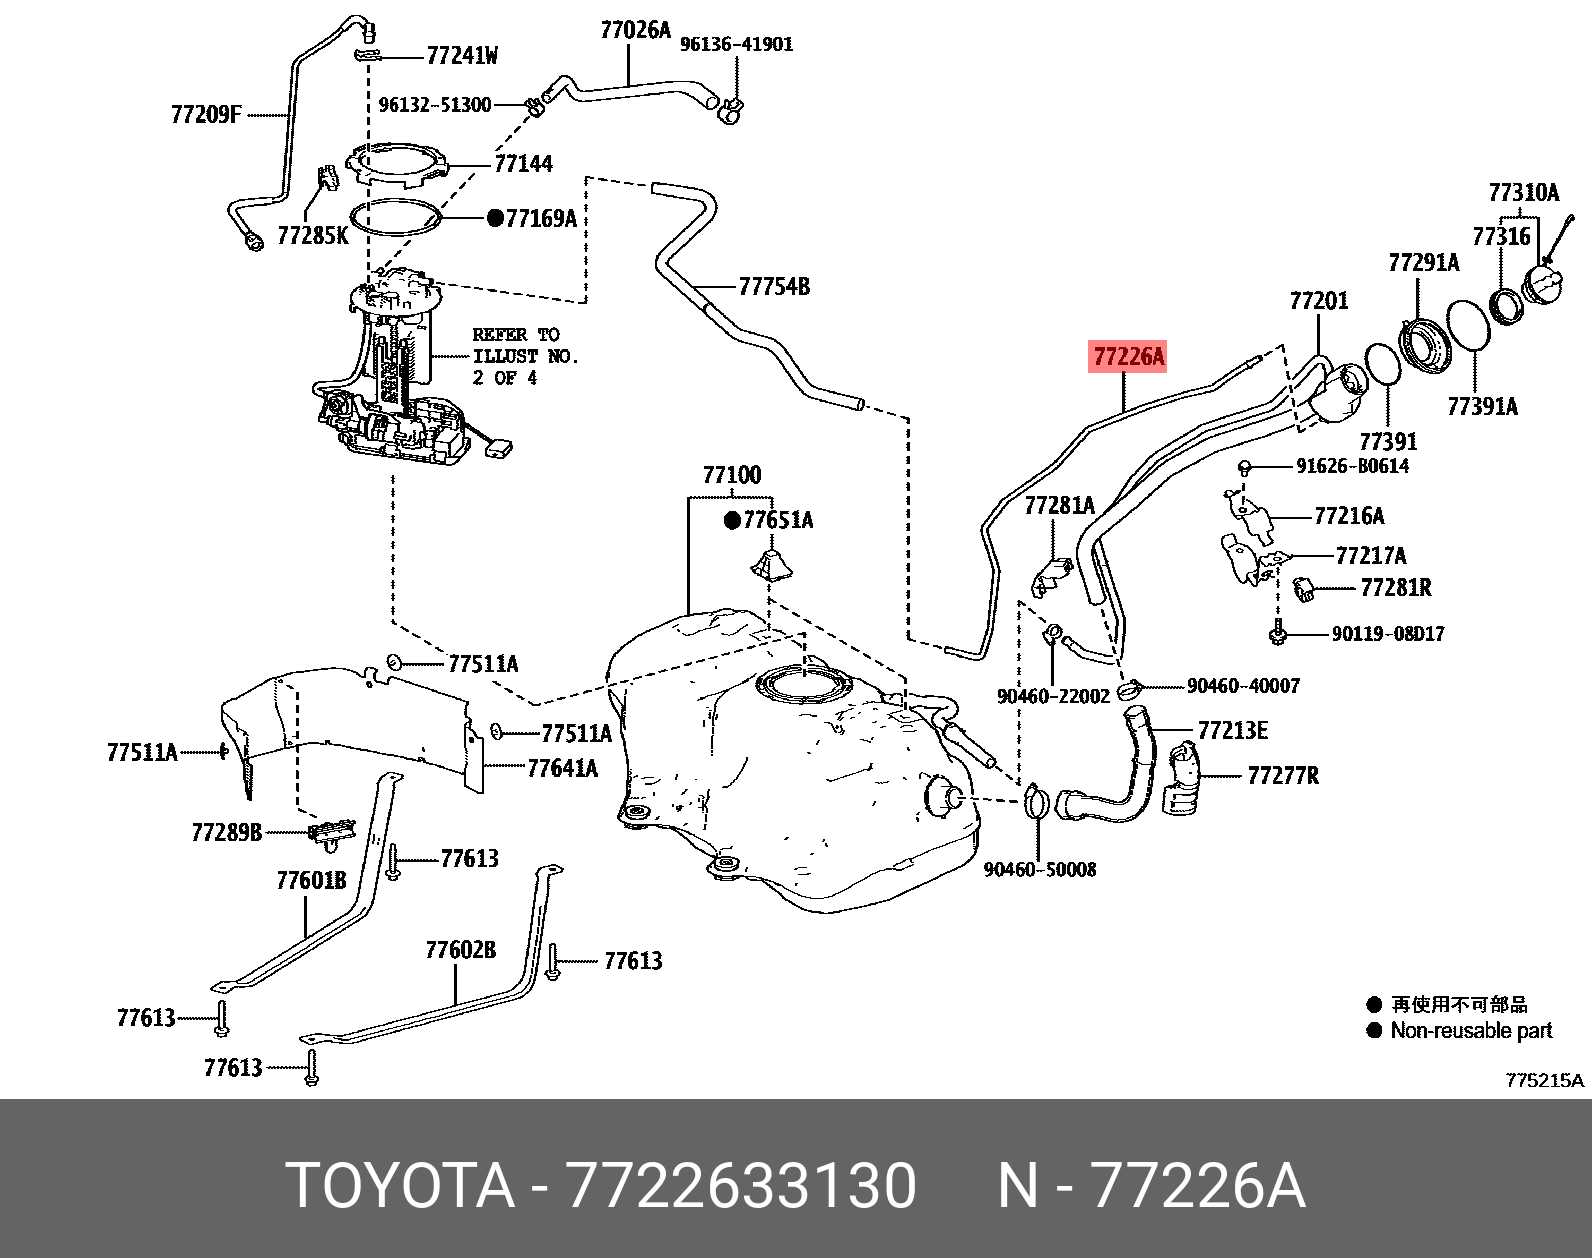 CAMRY 201706-, TUBE, FUEL TANK BREATHER, NO.6